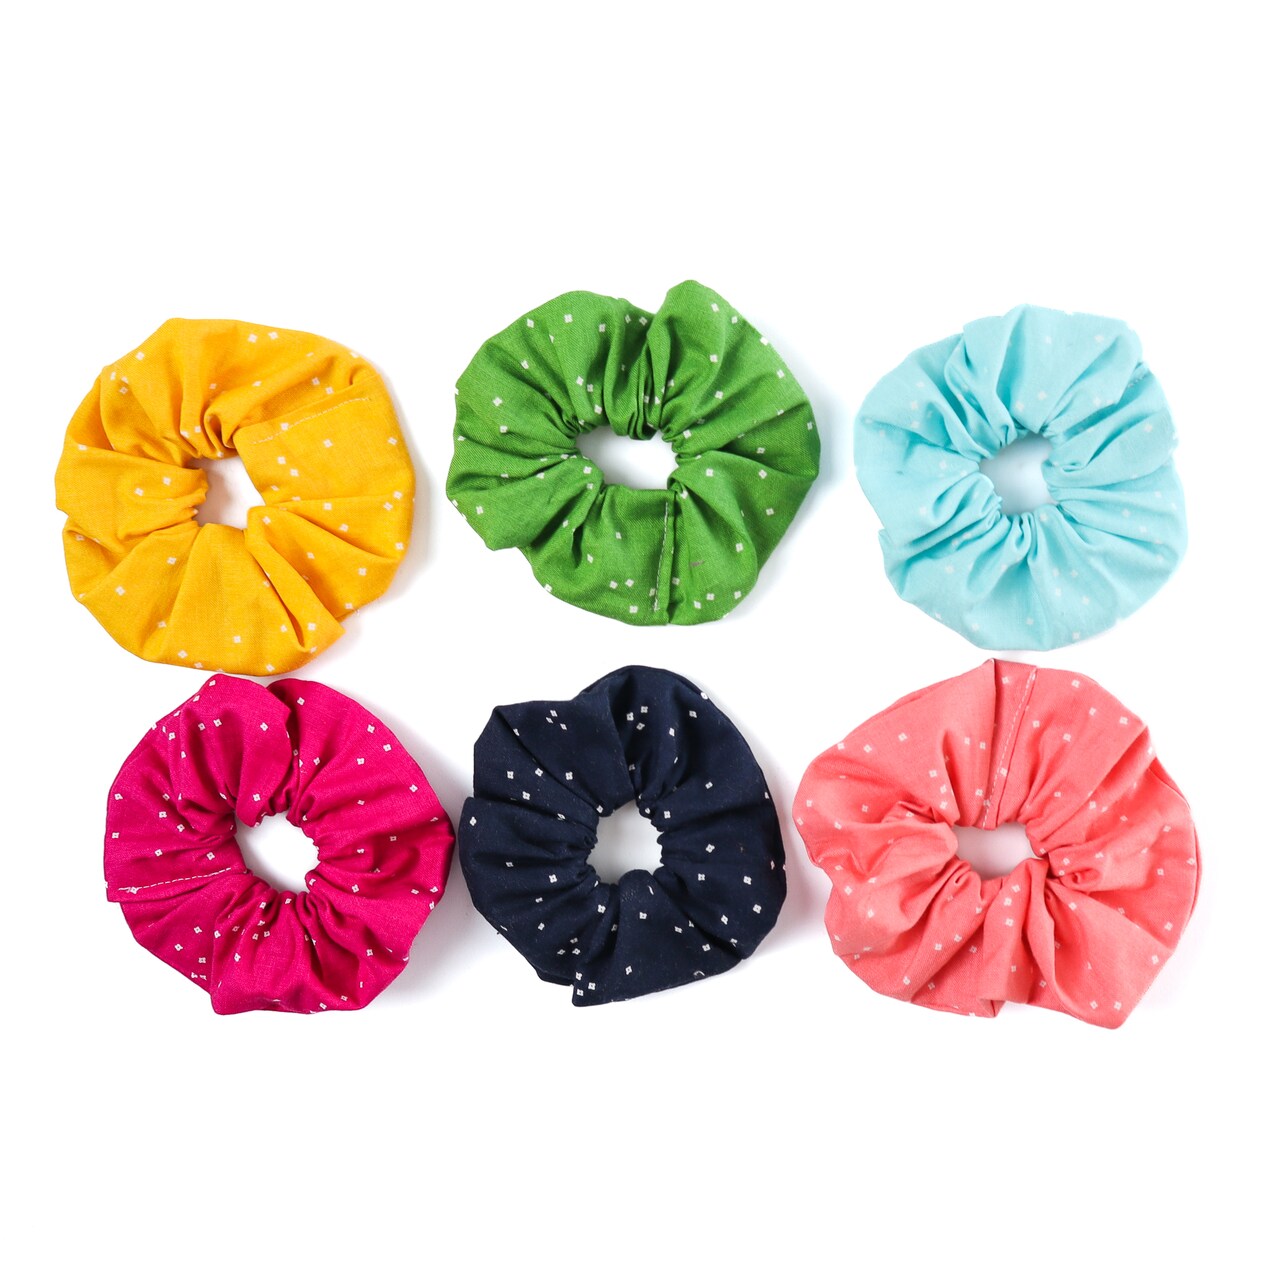 Scrunchie Beginner Sewing Kit - Blossom - Sewing Project Kit for Kids